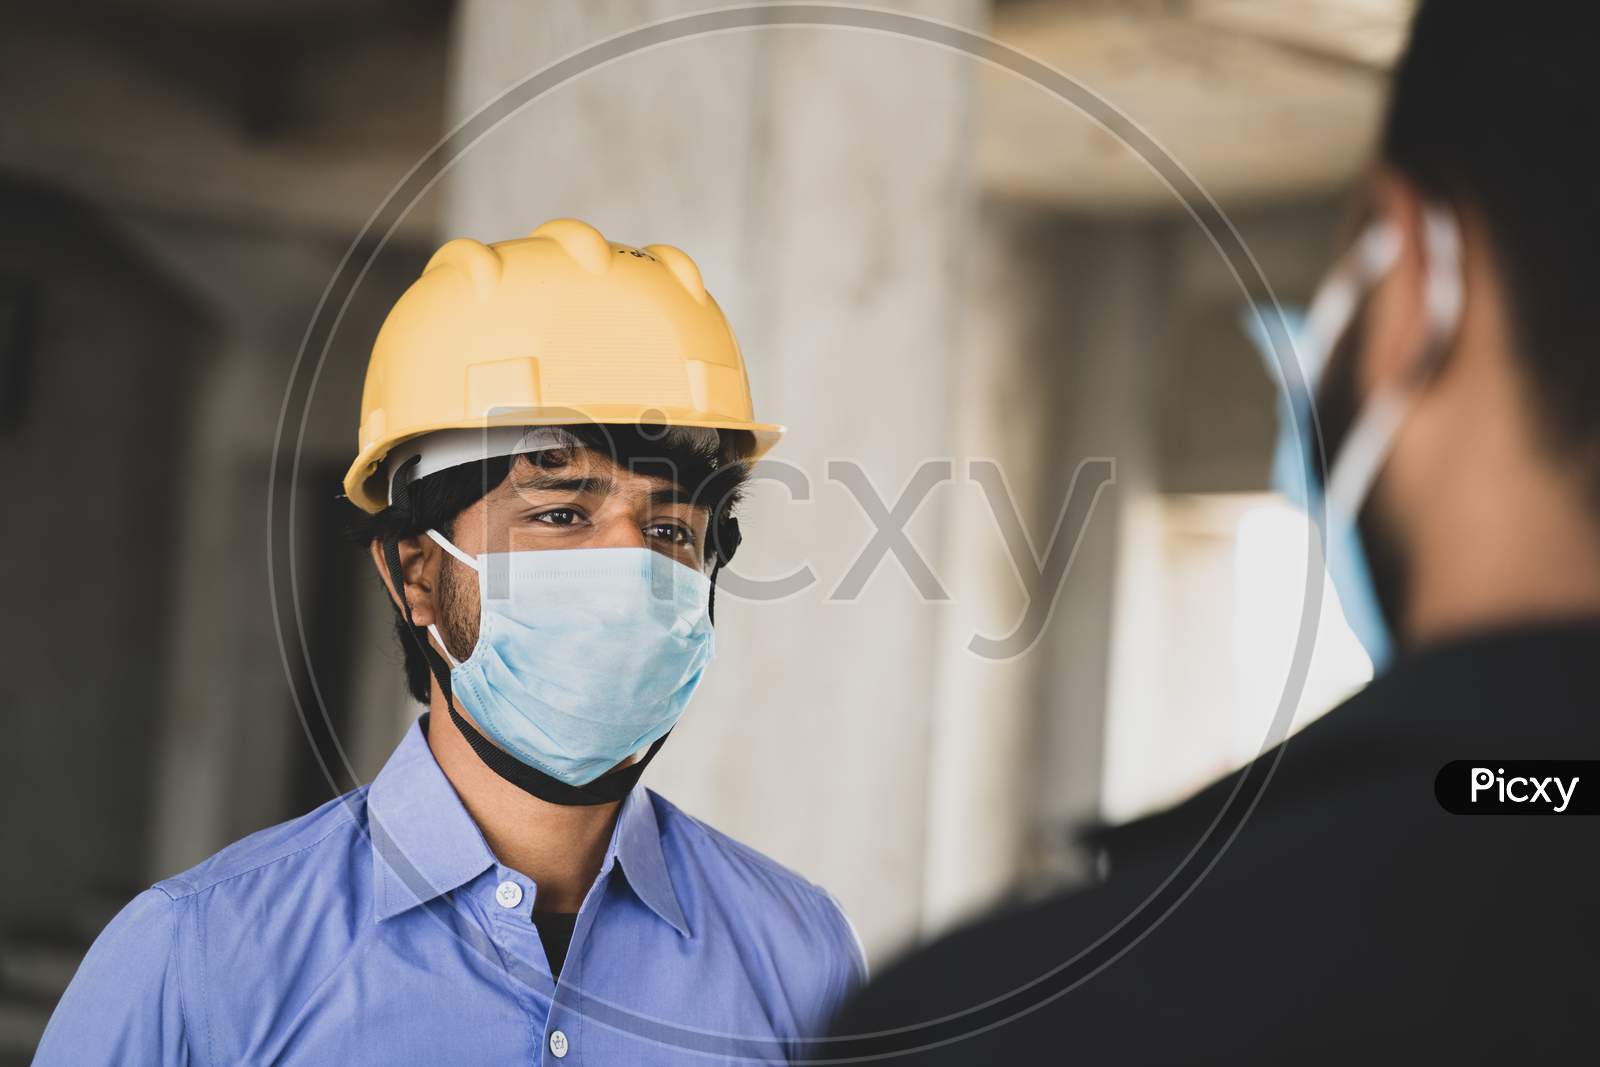 Two Construction Workers Or Engineers At Site Talking By Wearing Medical Face Mask While Maintaining Social Distance - Concept Of Business, Industry Reopen Or Covid-19 Safety Measures At Workplace.